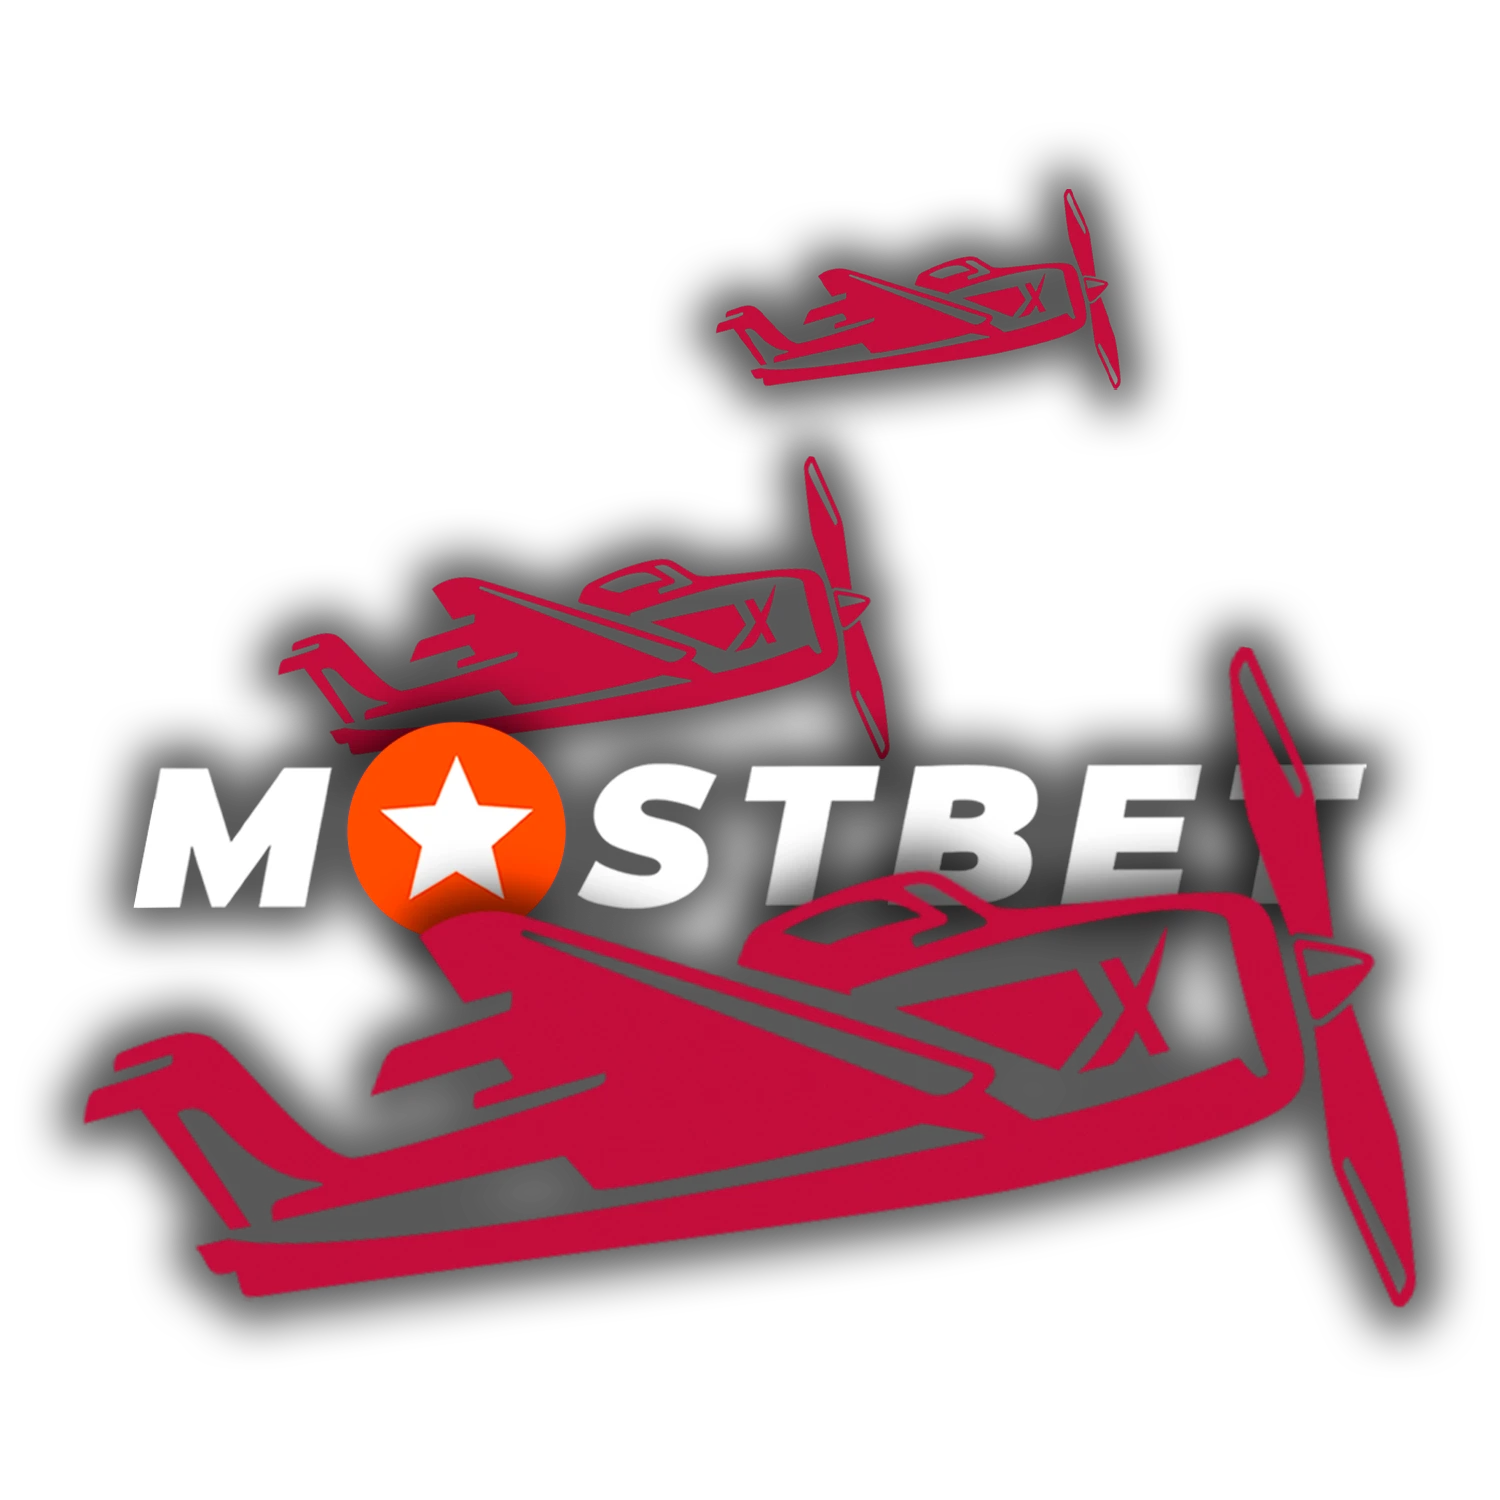 Find out how to start playing Aviator using a Mostbet account.